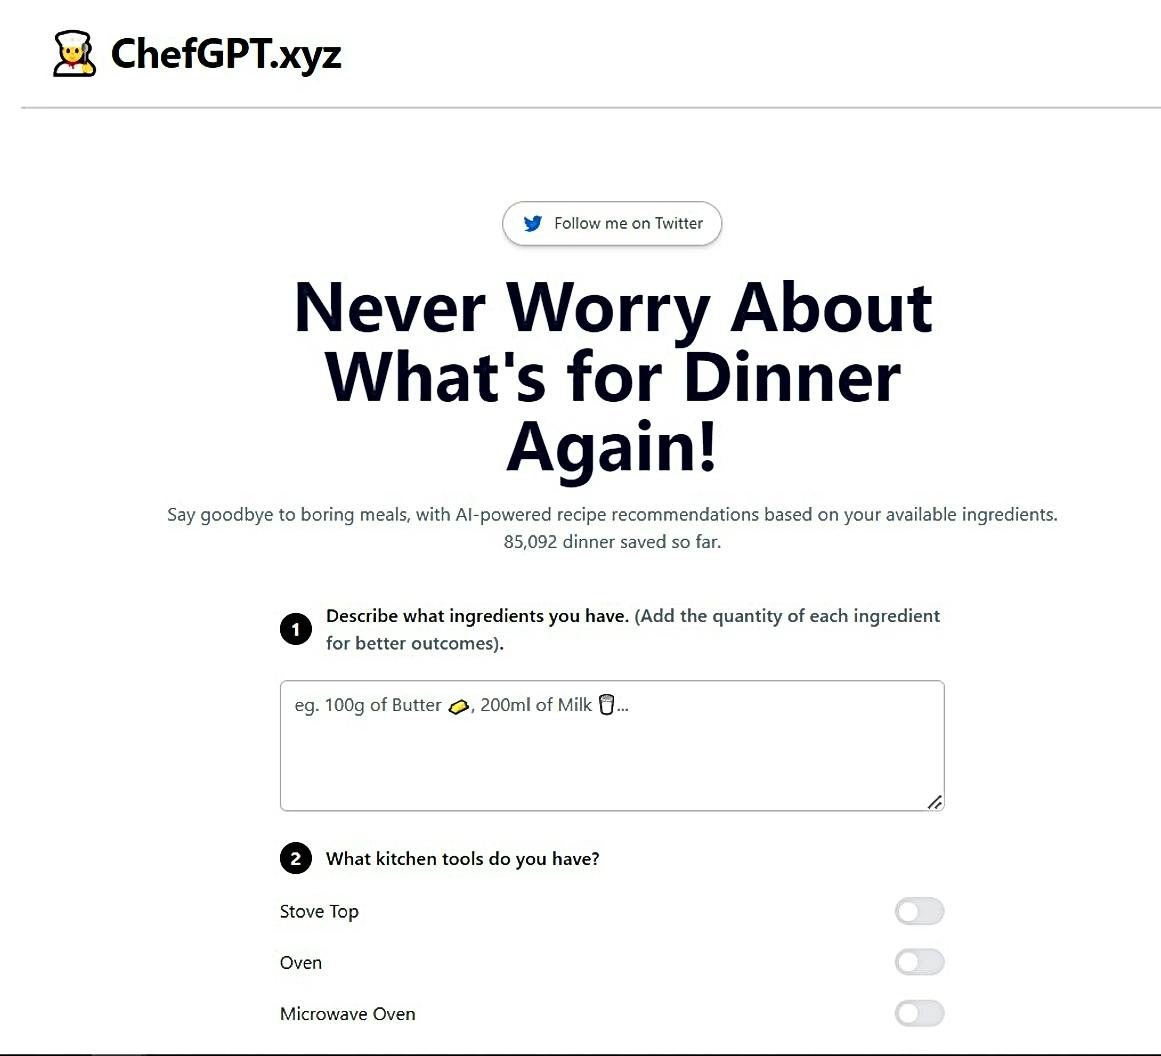 ChefGPT featured